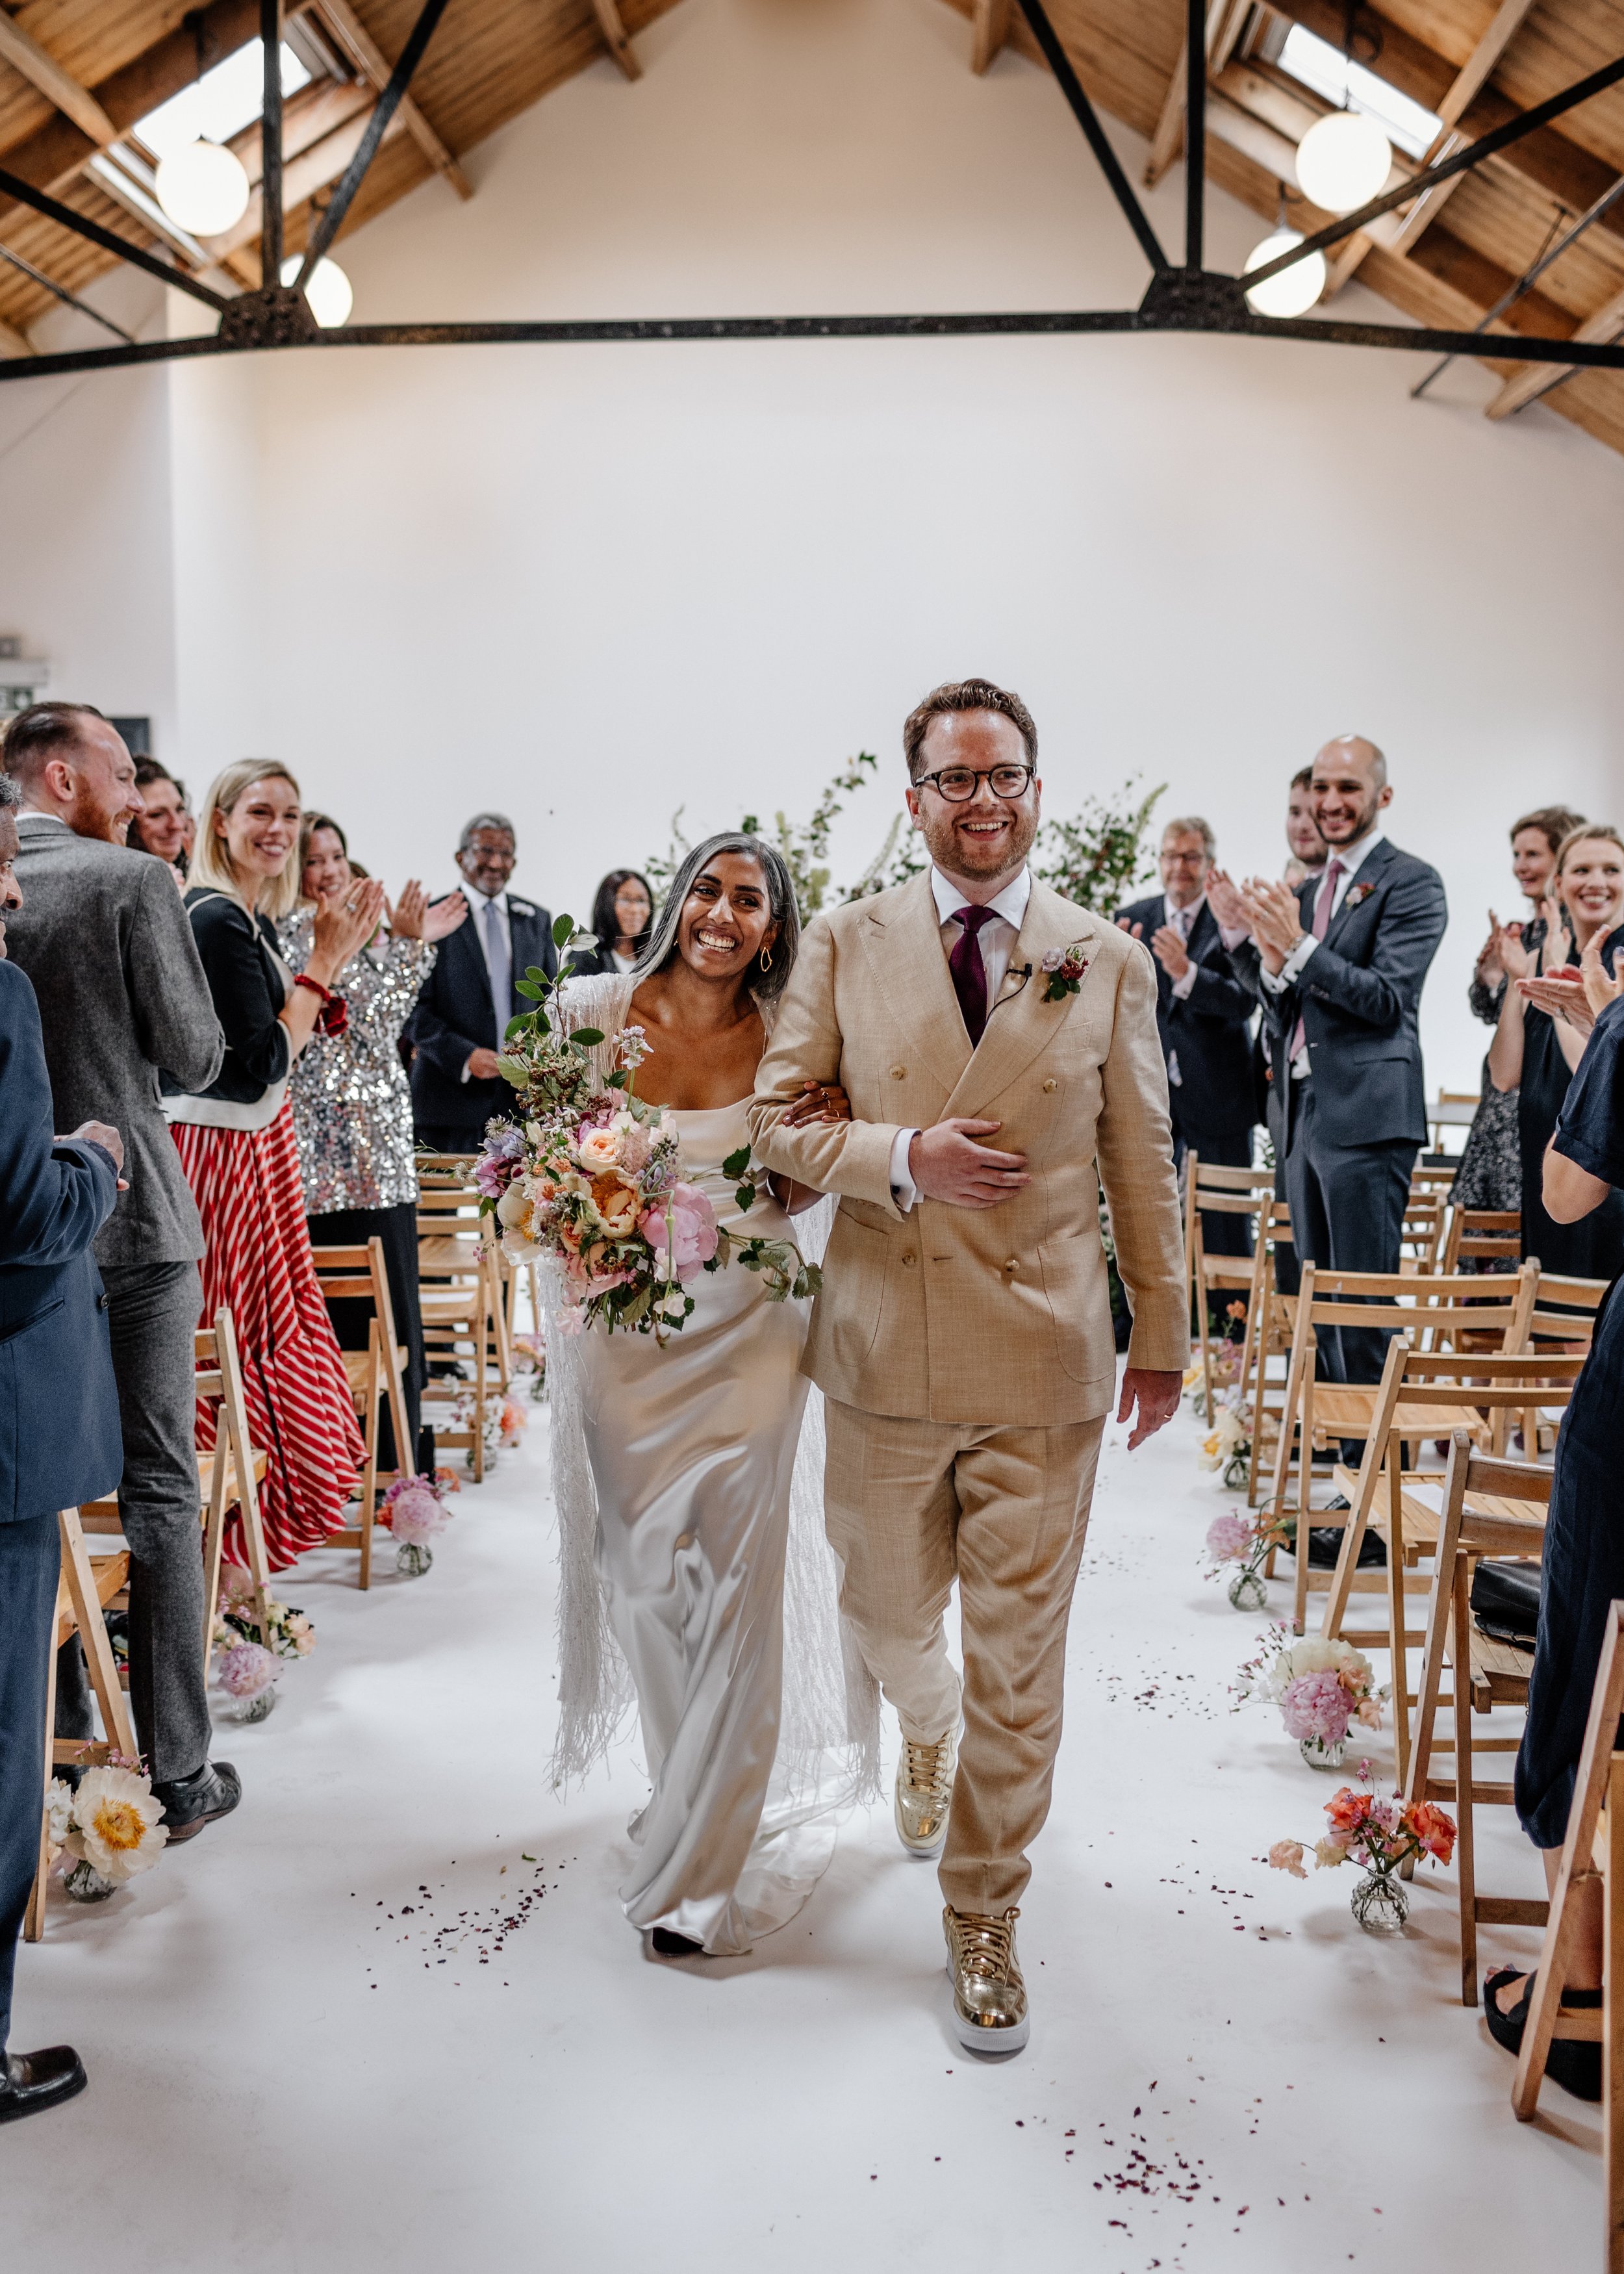 Beautiful bride Rebecca wore a wedding dress and beaded cape by Halfpenny London